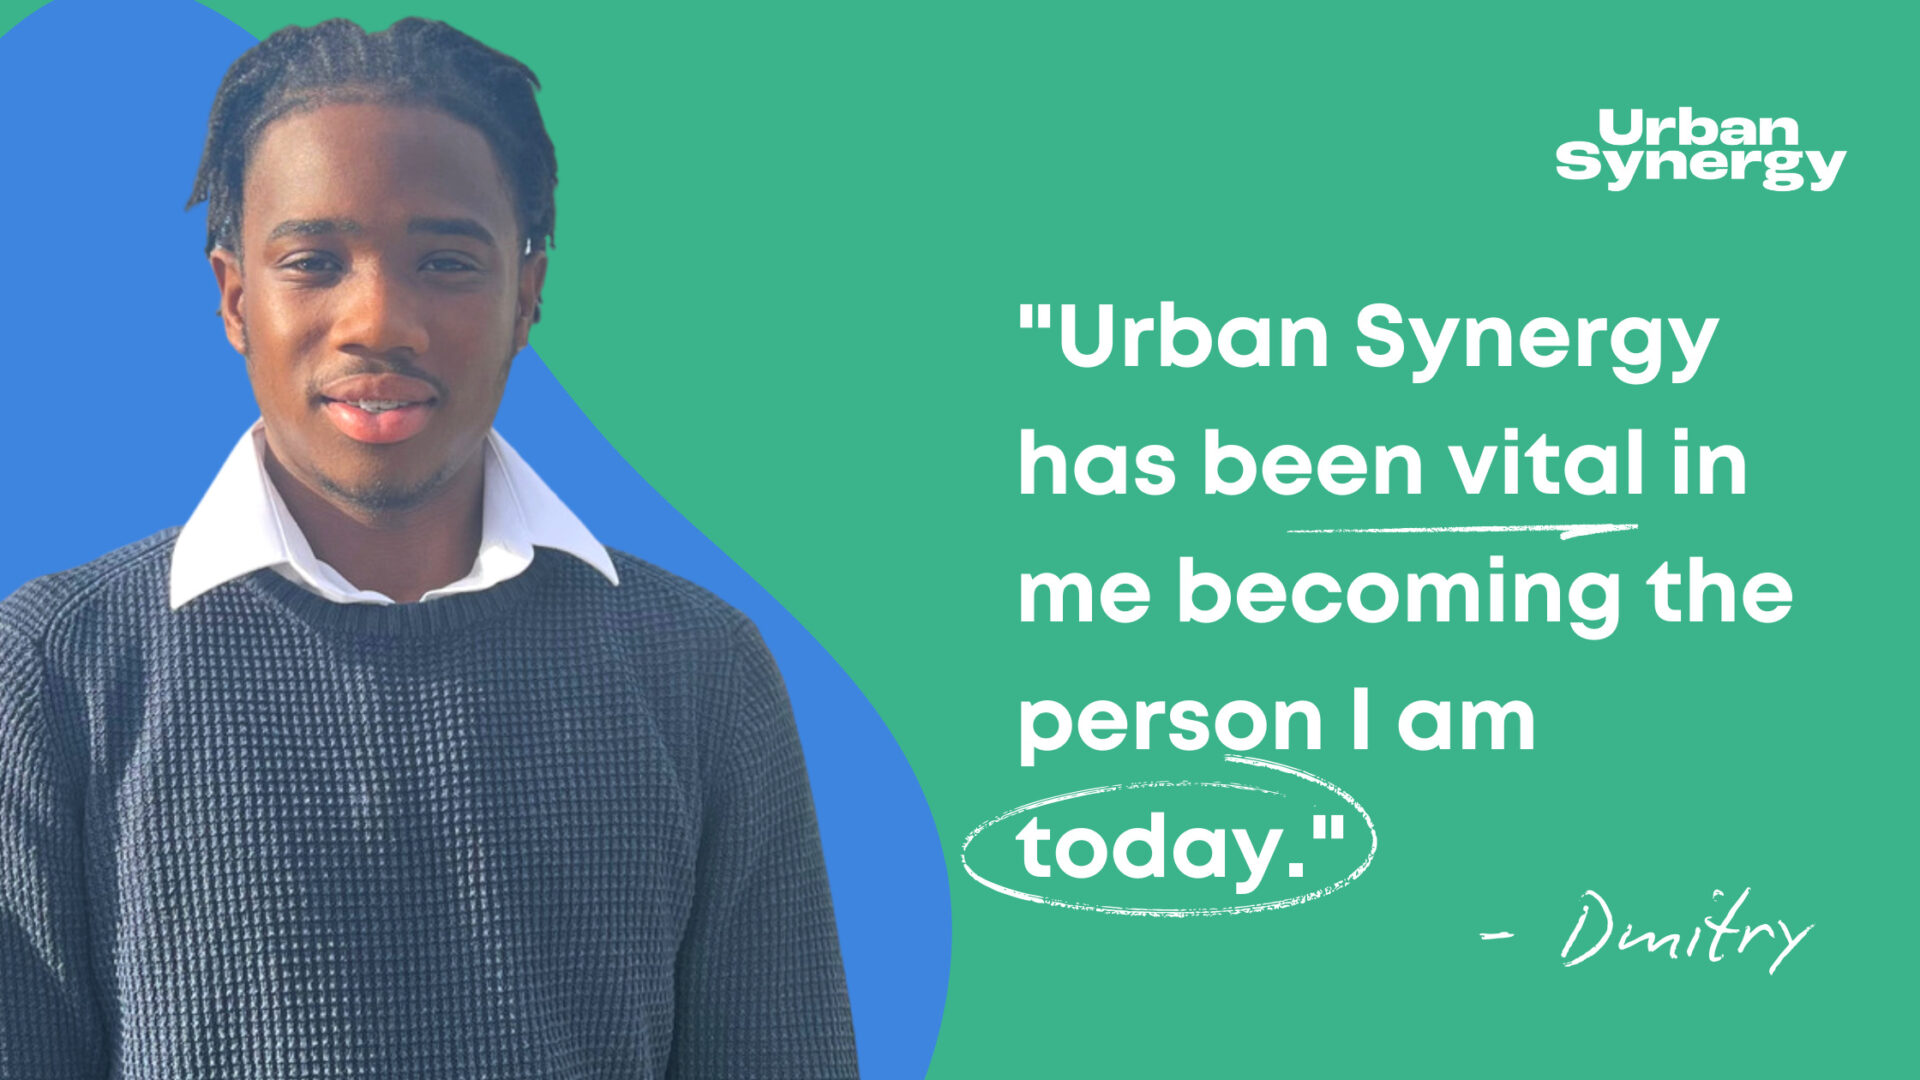 Urban Synergy has been vital in landing this apprenticeship and becoming the person I am today.